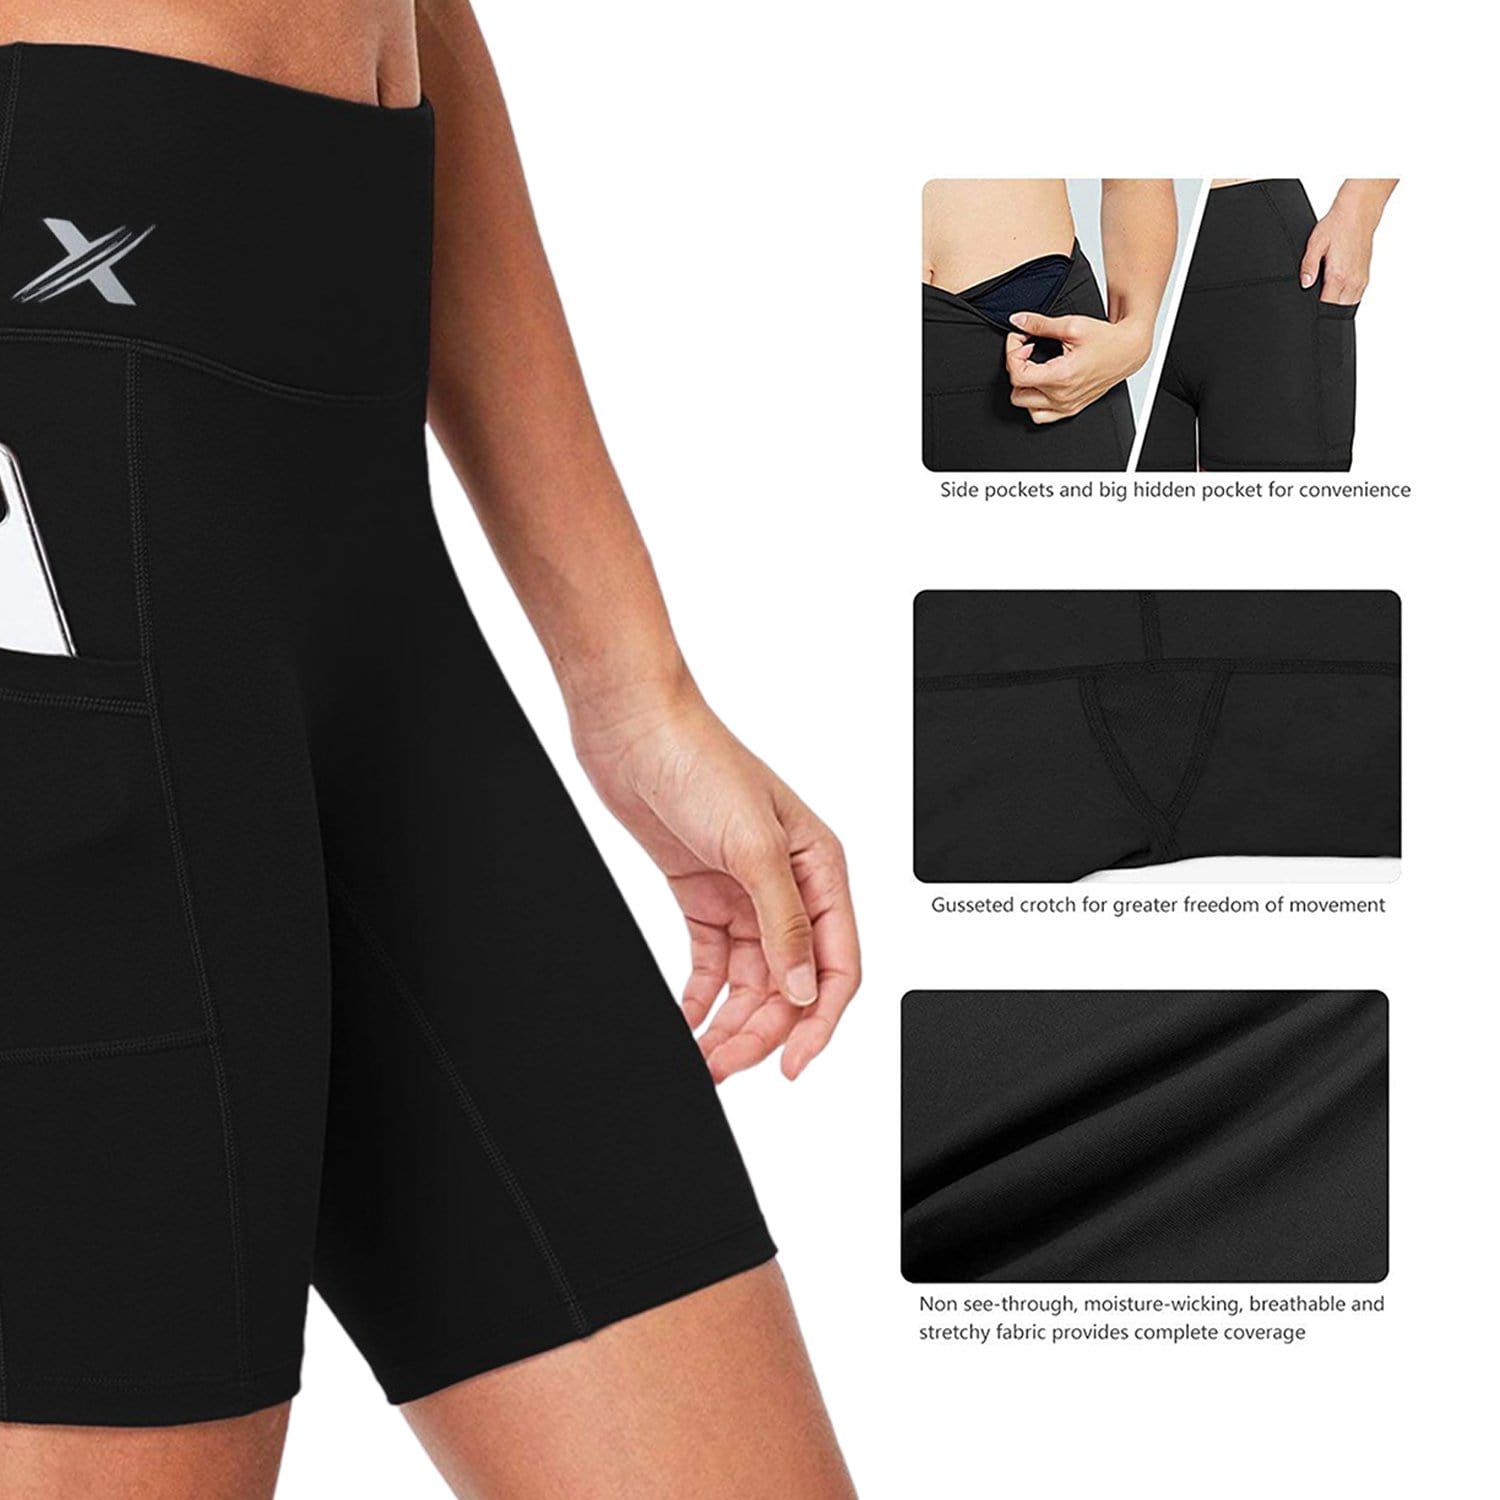 MorningSave: 2-Pack: Extreme Fit Women's High Waist Performance Yoga Shorts